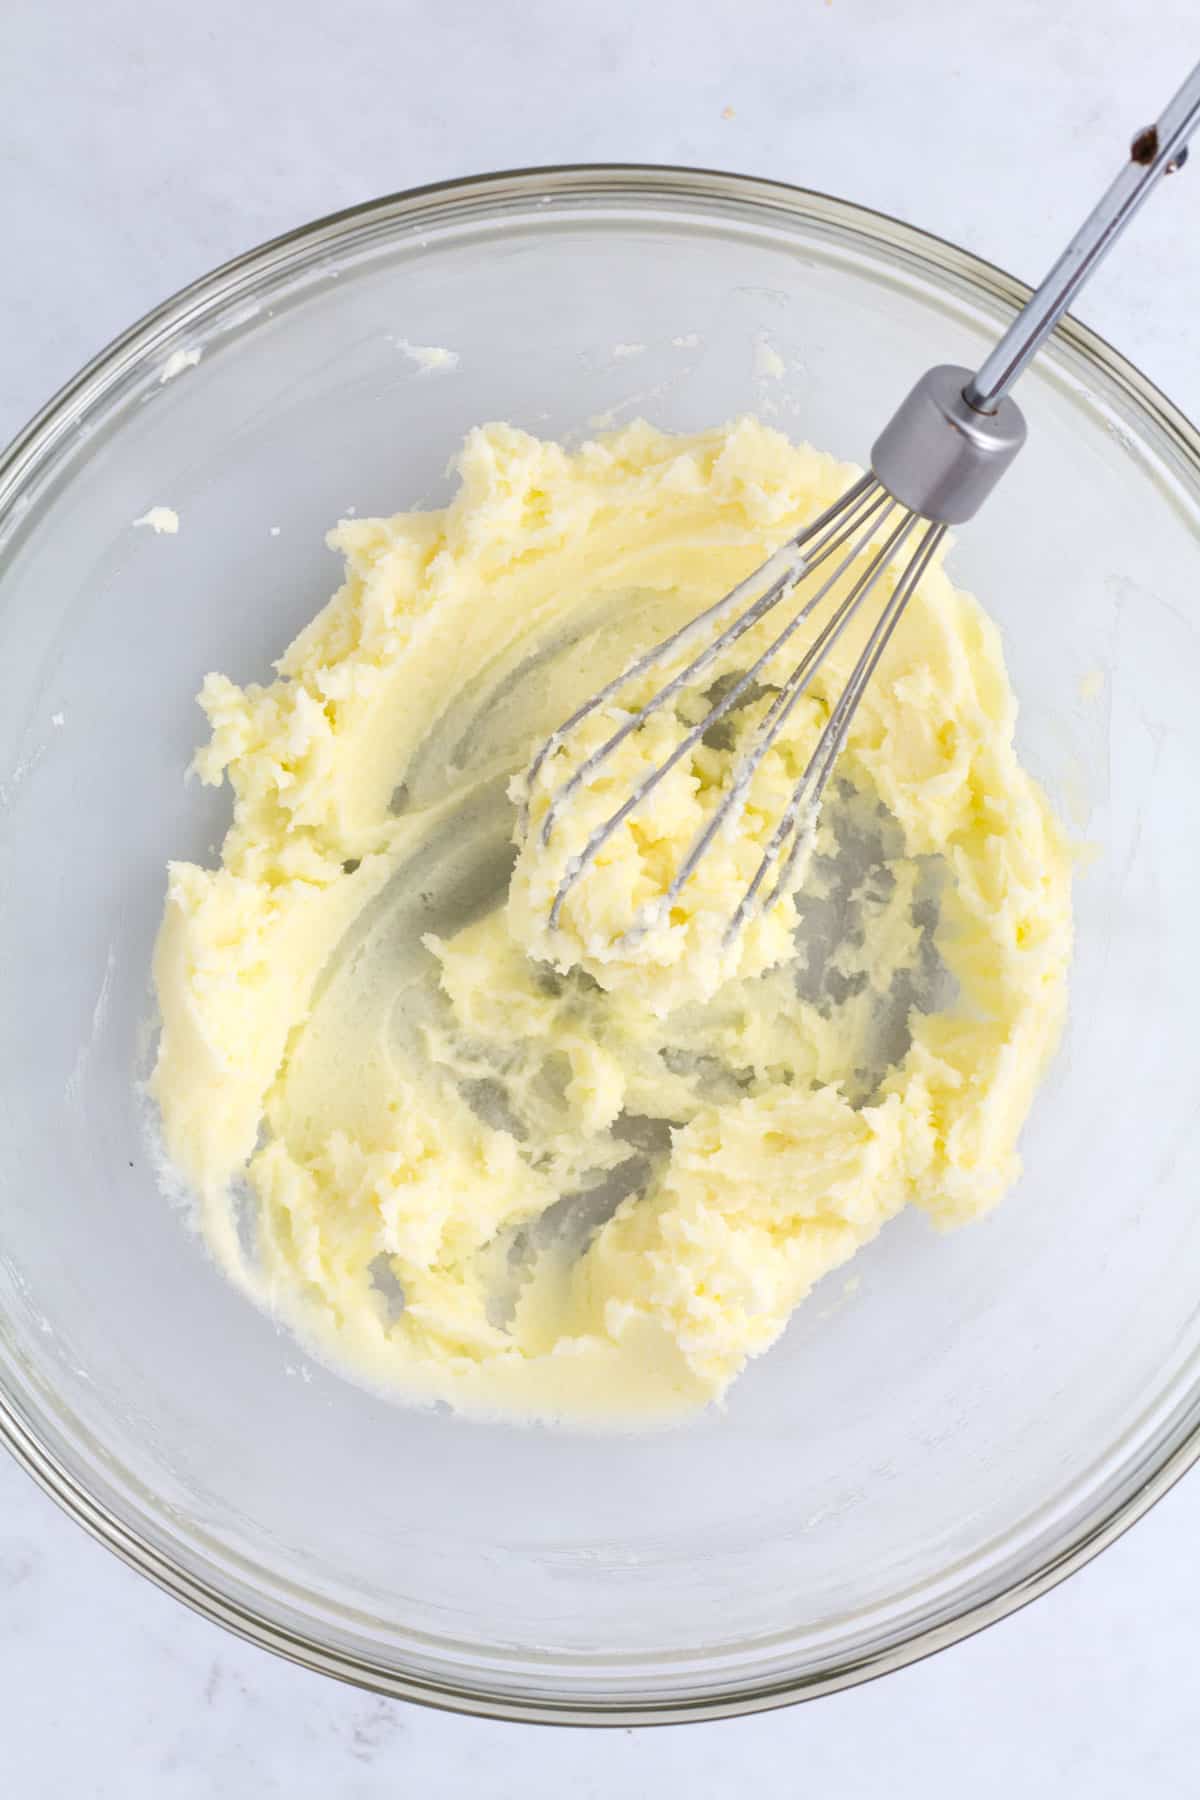 An overhead view of mascarpone and sugar blended together in a clear glass bowl with a whisk.